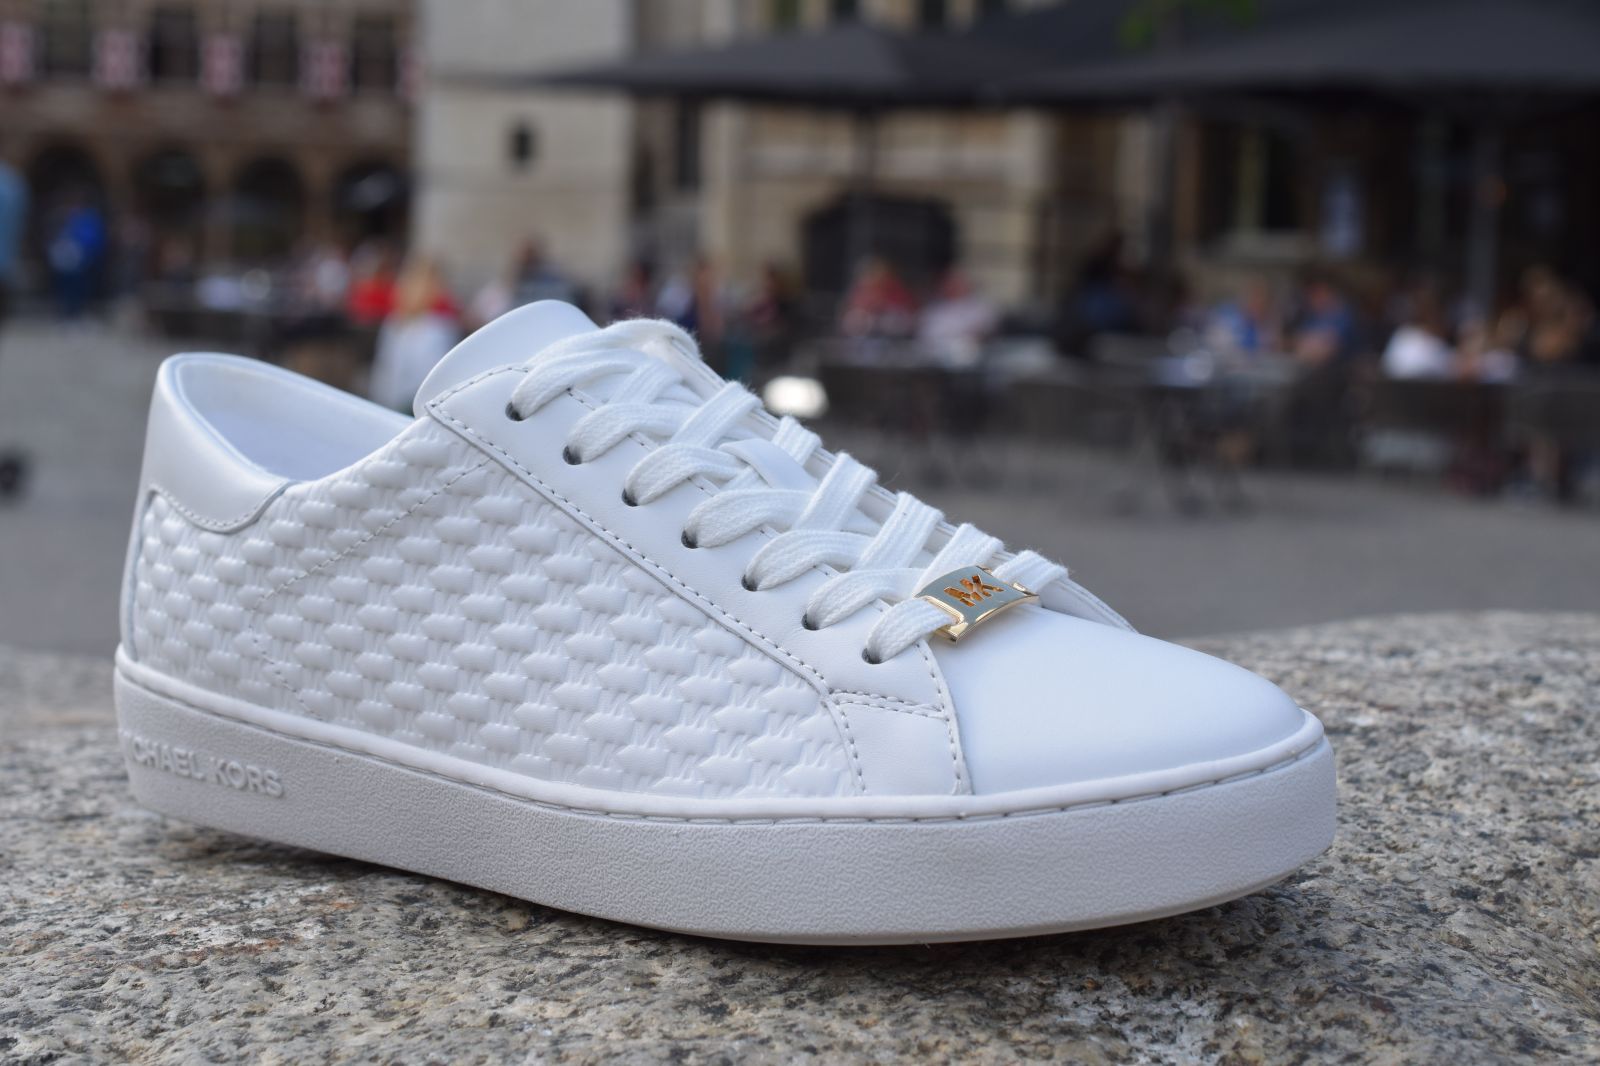 Kors Shoes Veter Wit dames (COLBY - 43R5COFP2L 085 Optic White) - Mayday (Aalst)